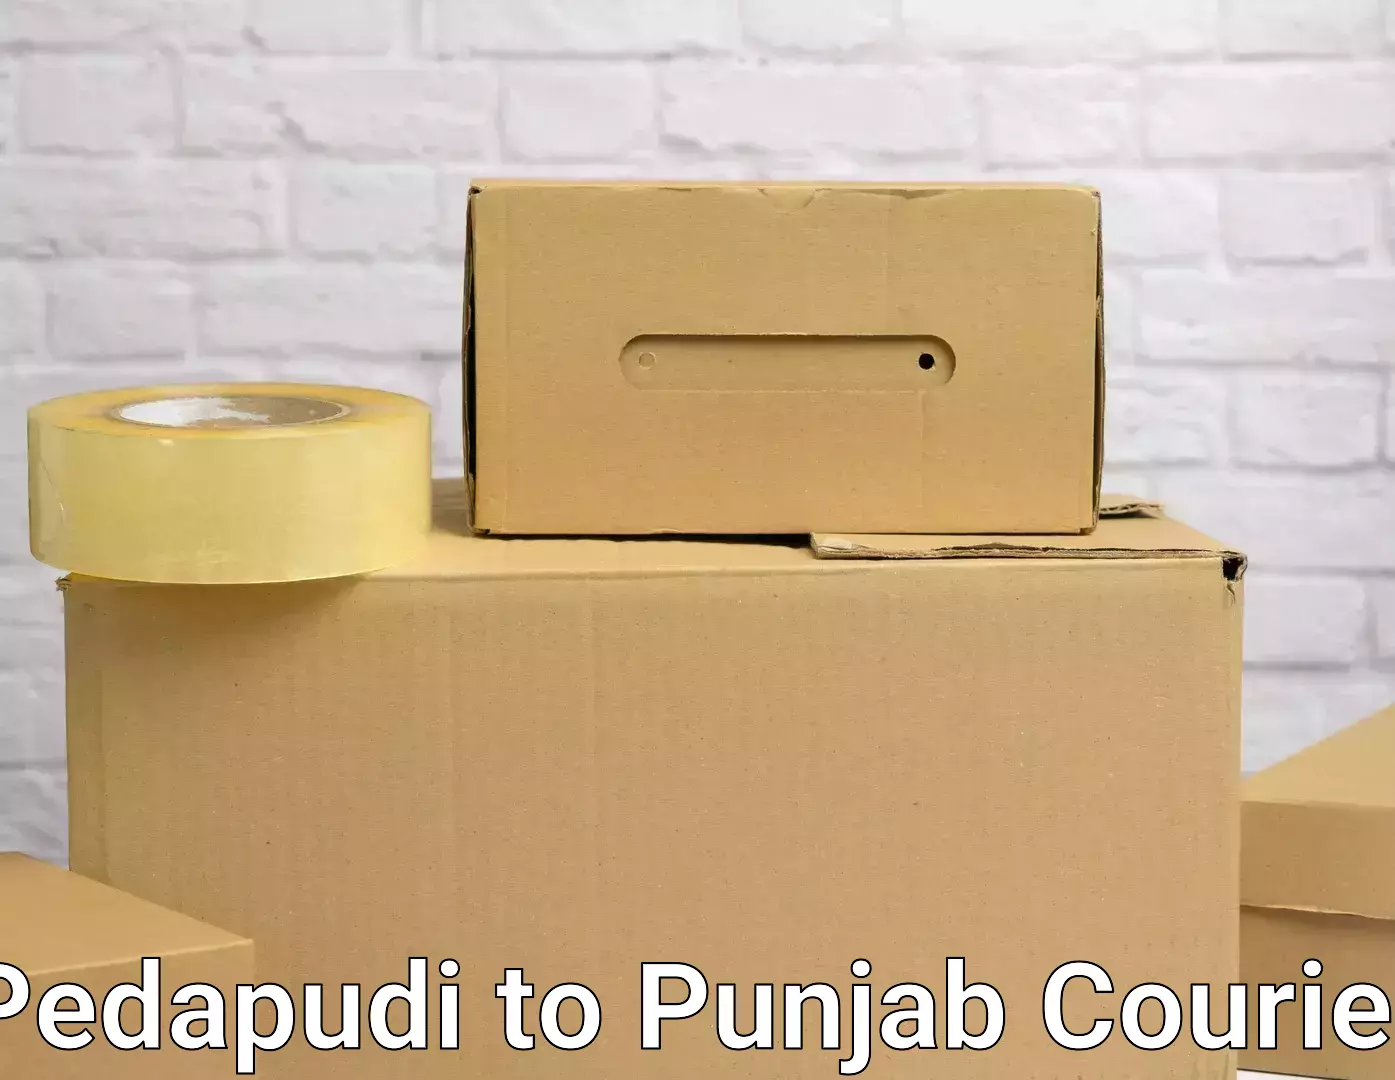 Smooth relocation services Pedapudi to Punjab